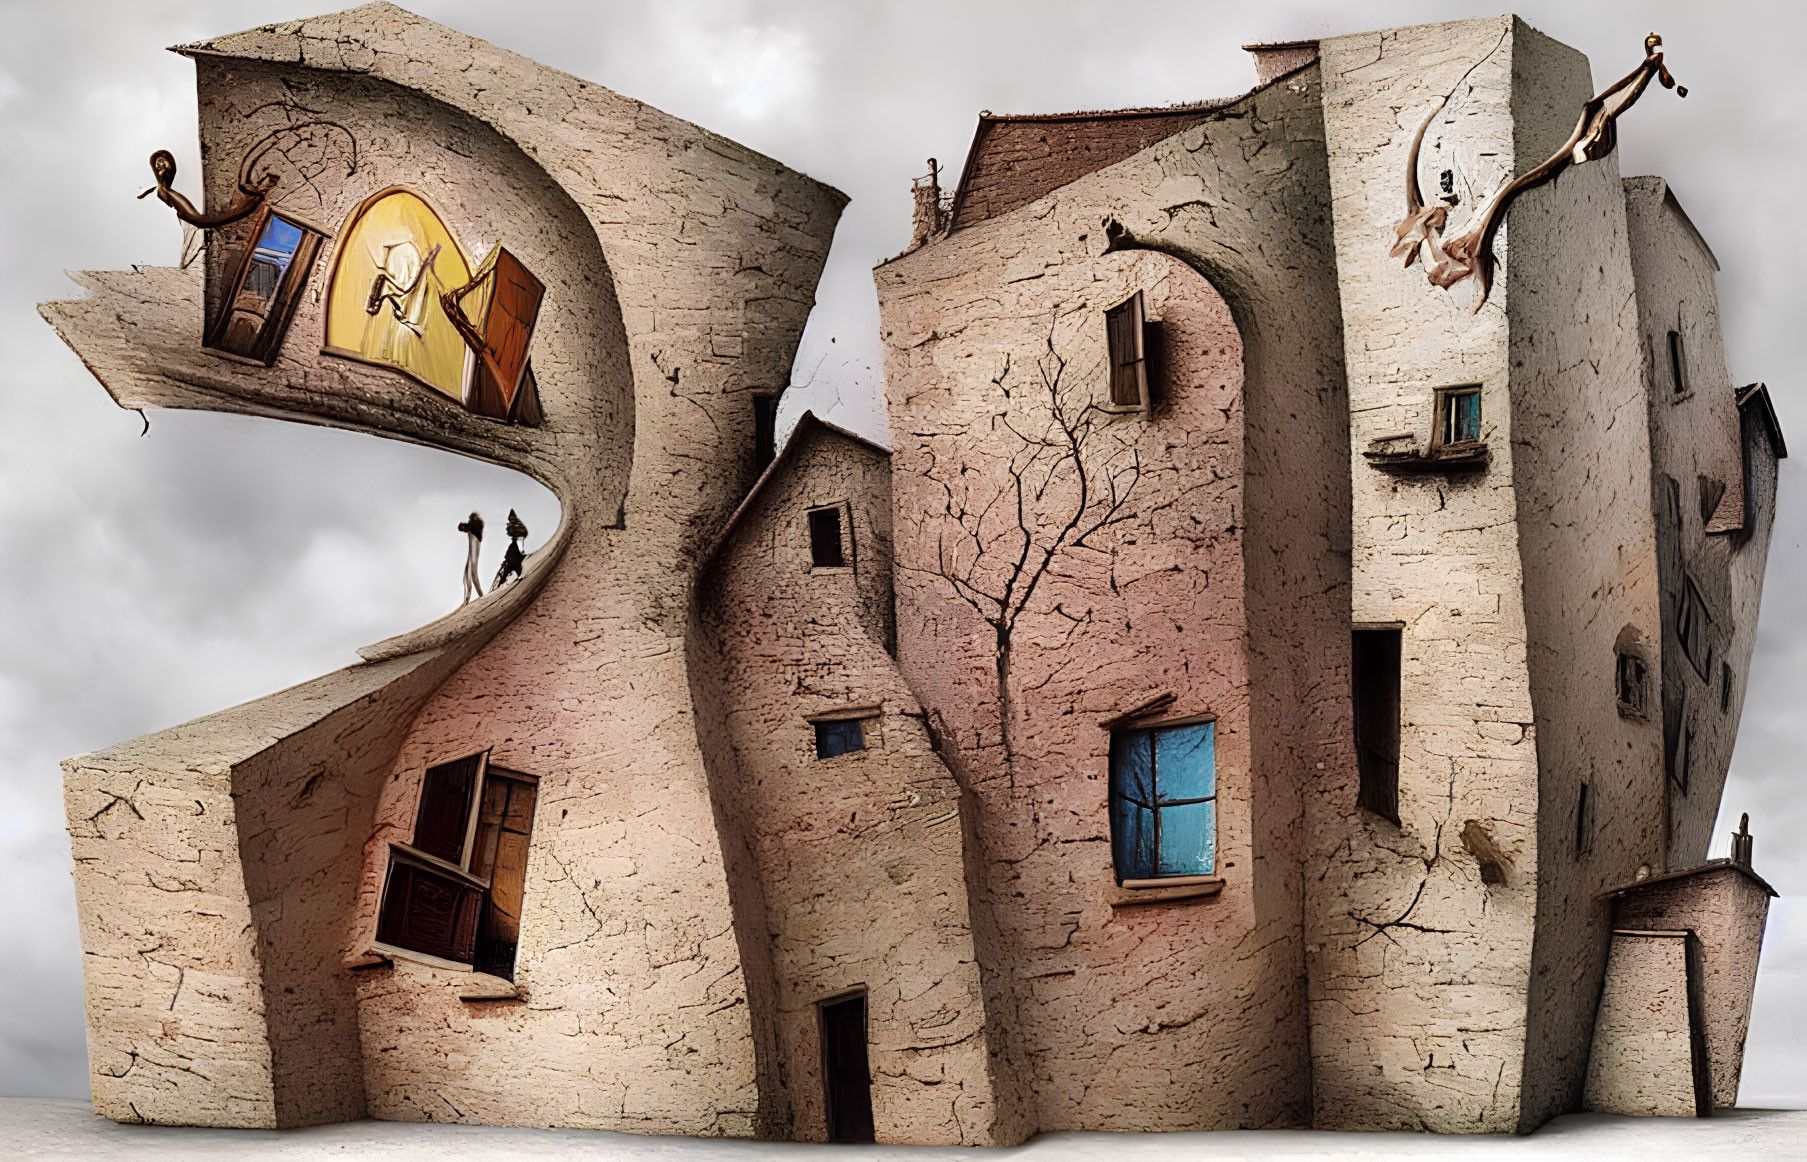 Distorted surreal buildings under cloudy sky: dream-like and whimsical.